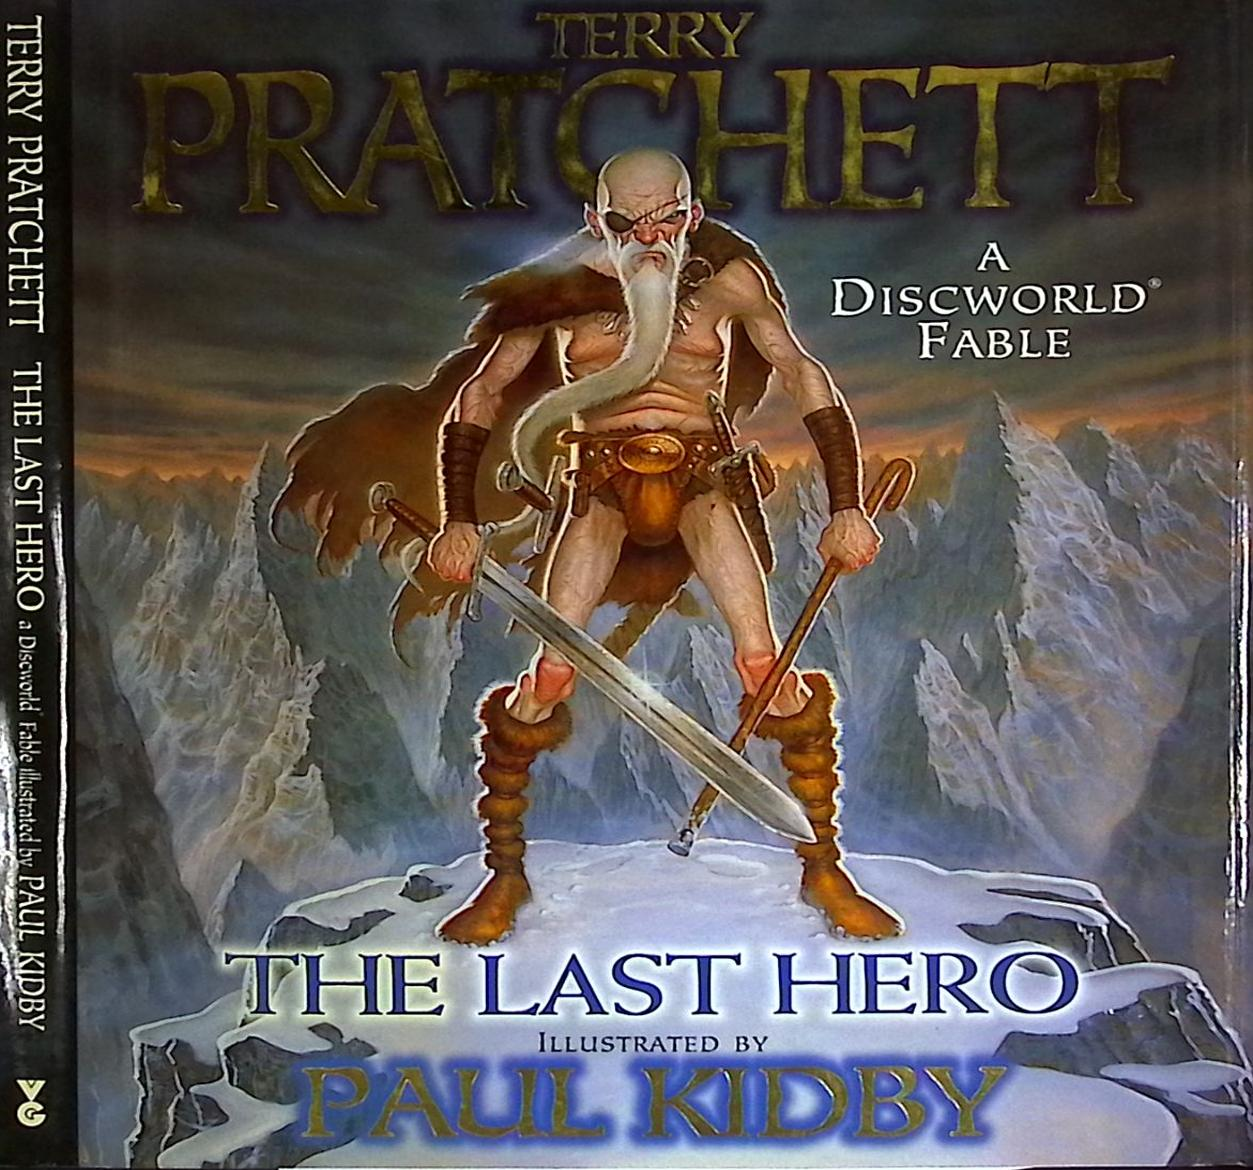 The Last Hero. A Discworld Fable.